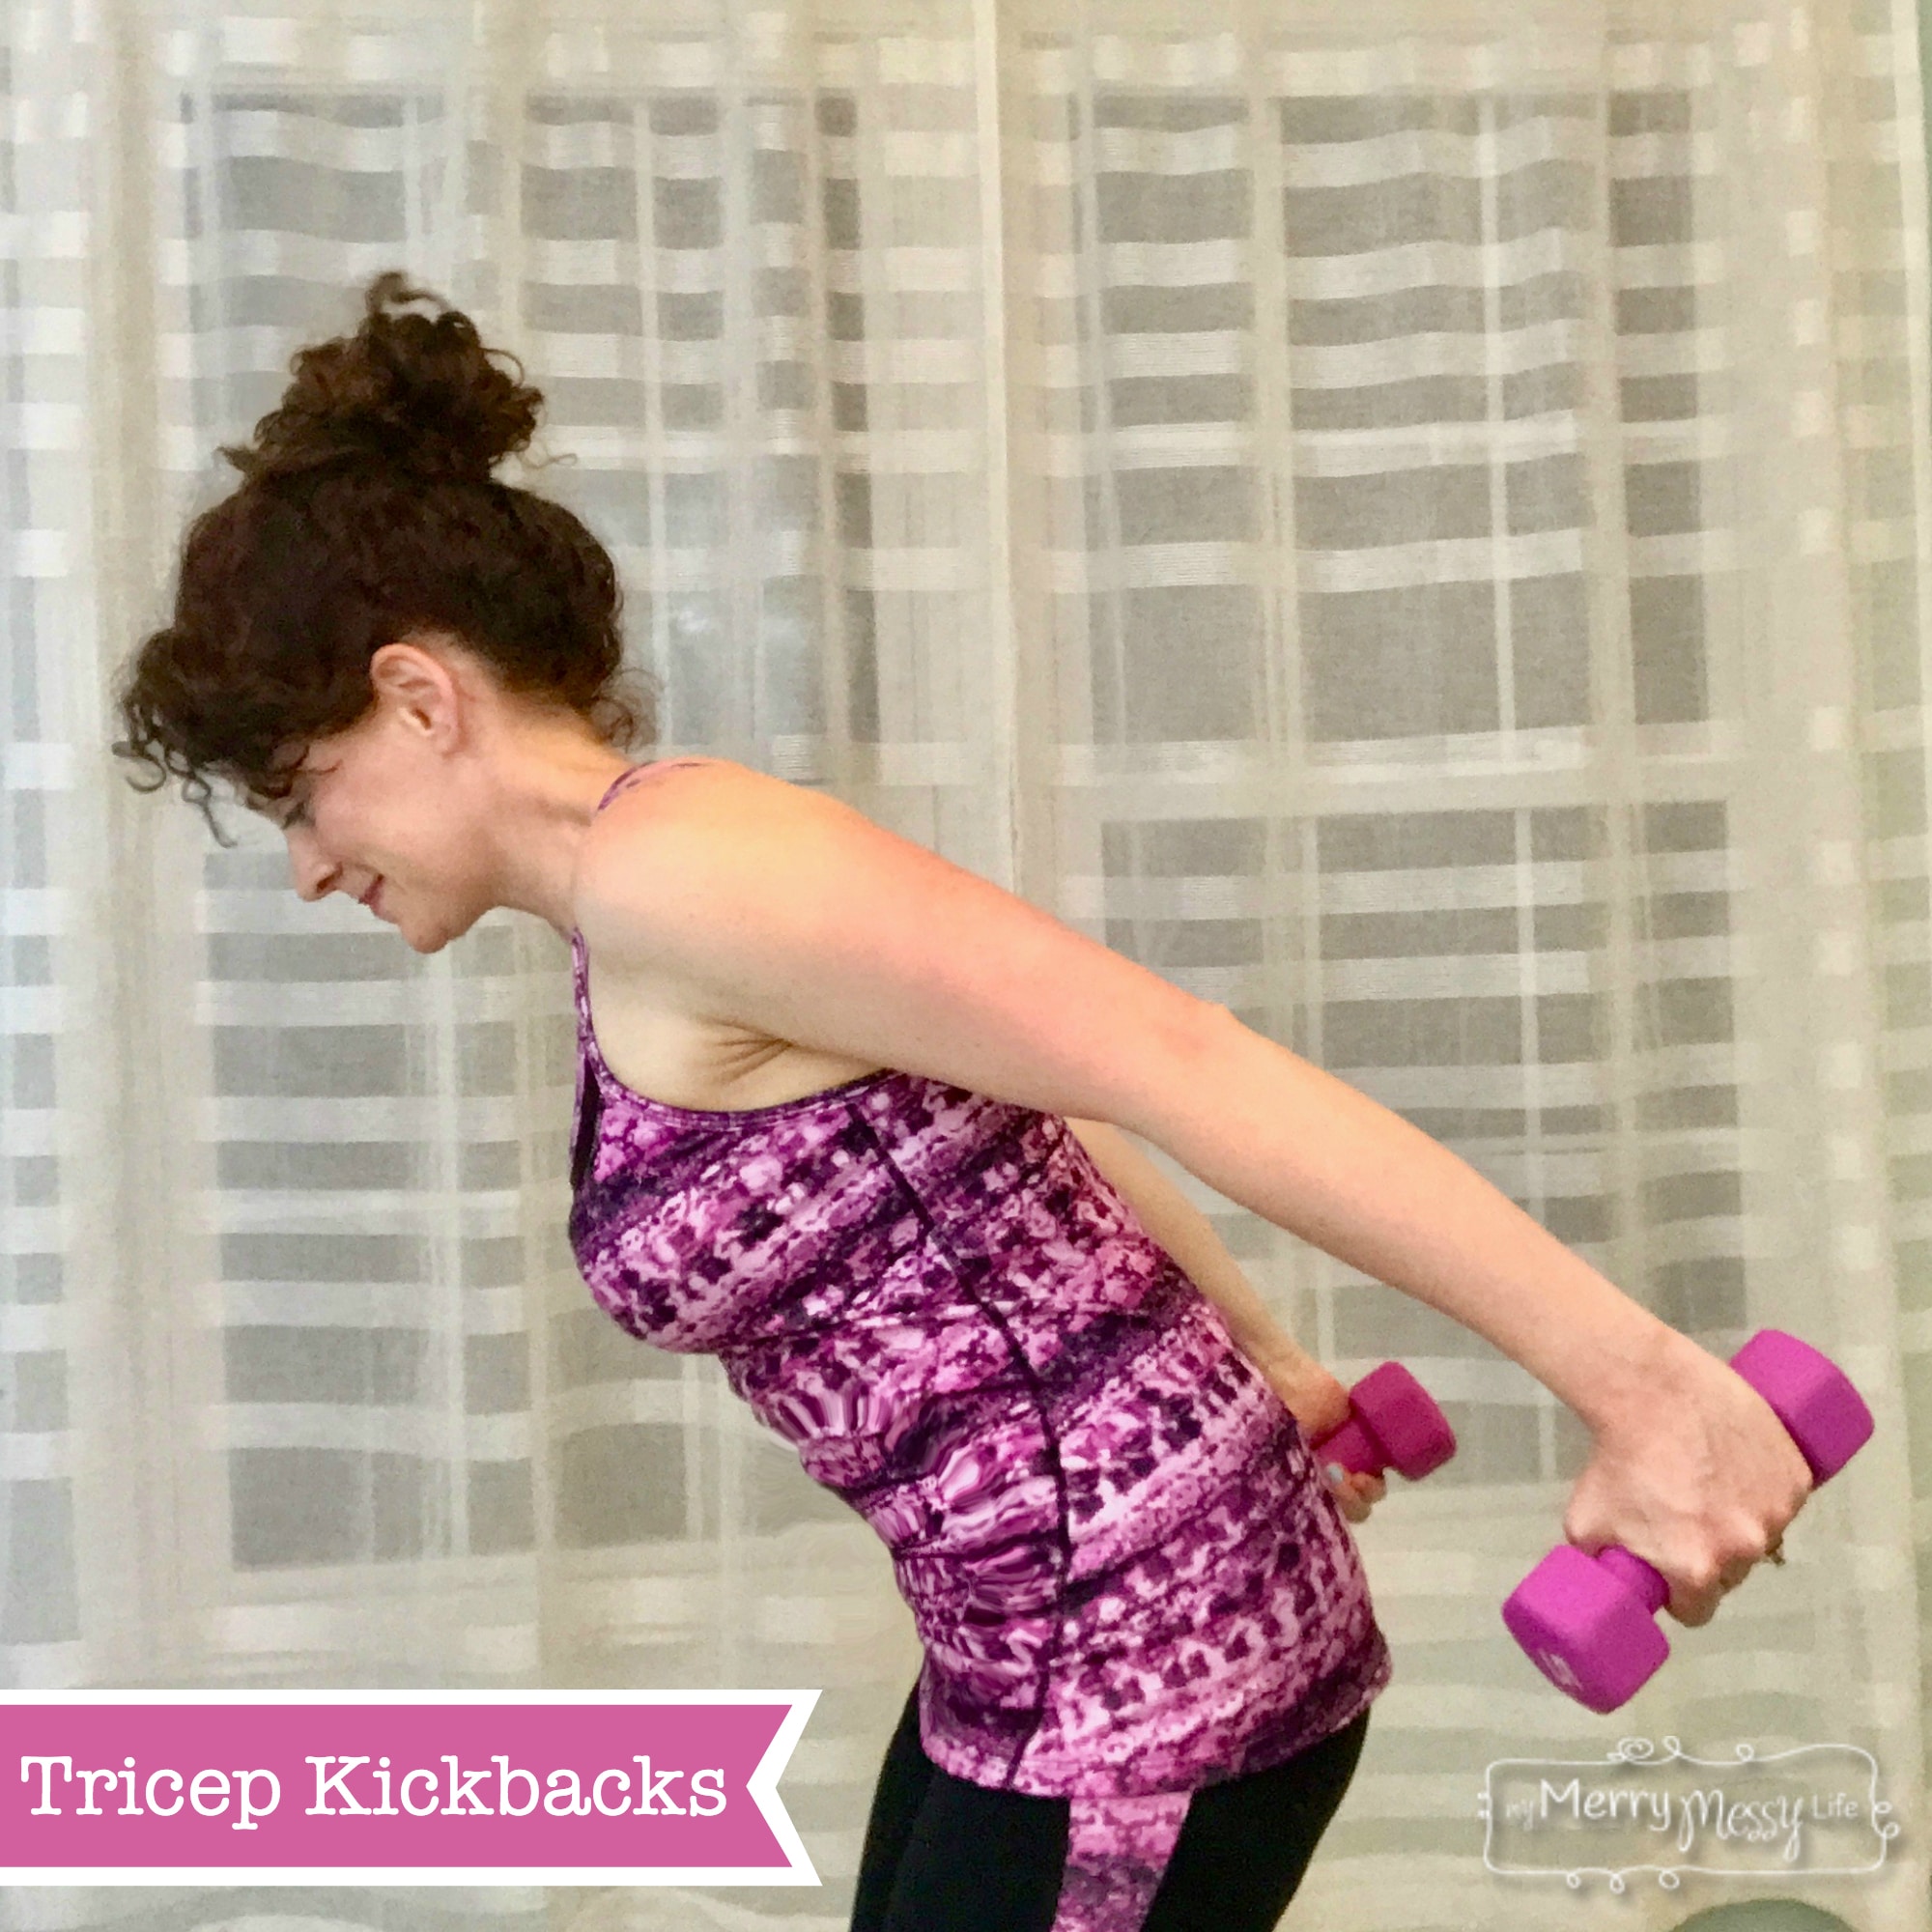 Tricep Kickbacks - part of a 15 min. arm workout for sexy, strong arms!